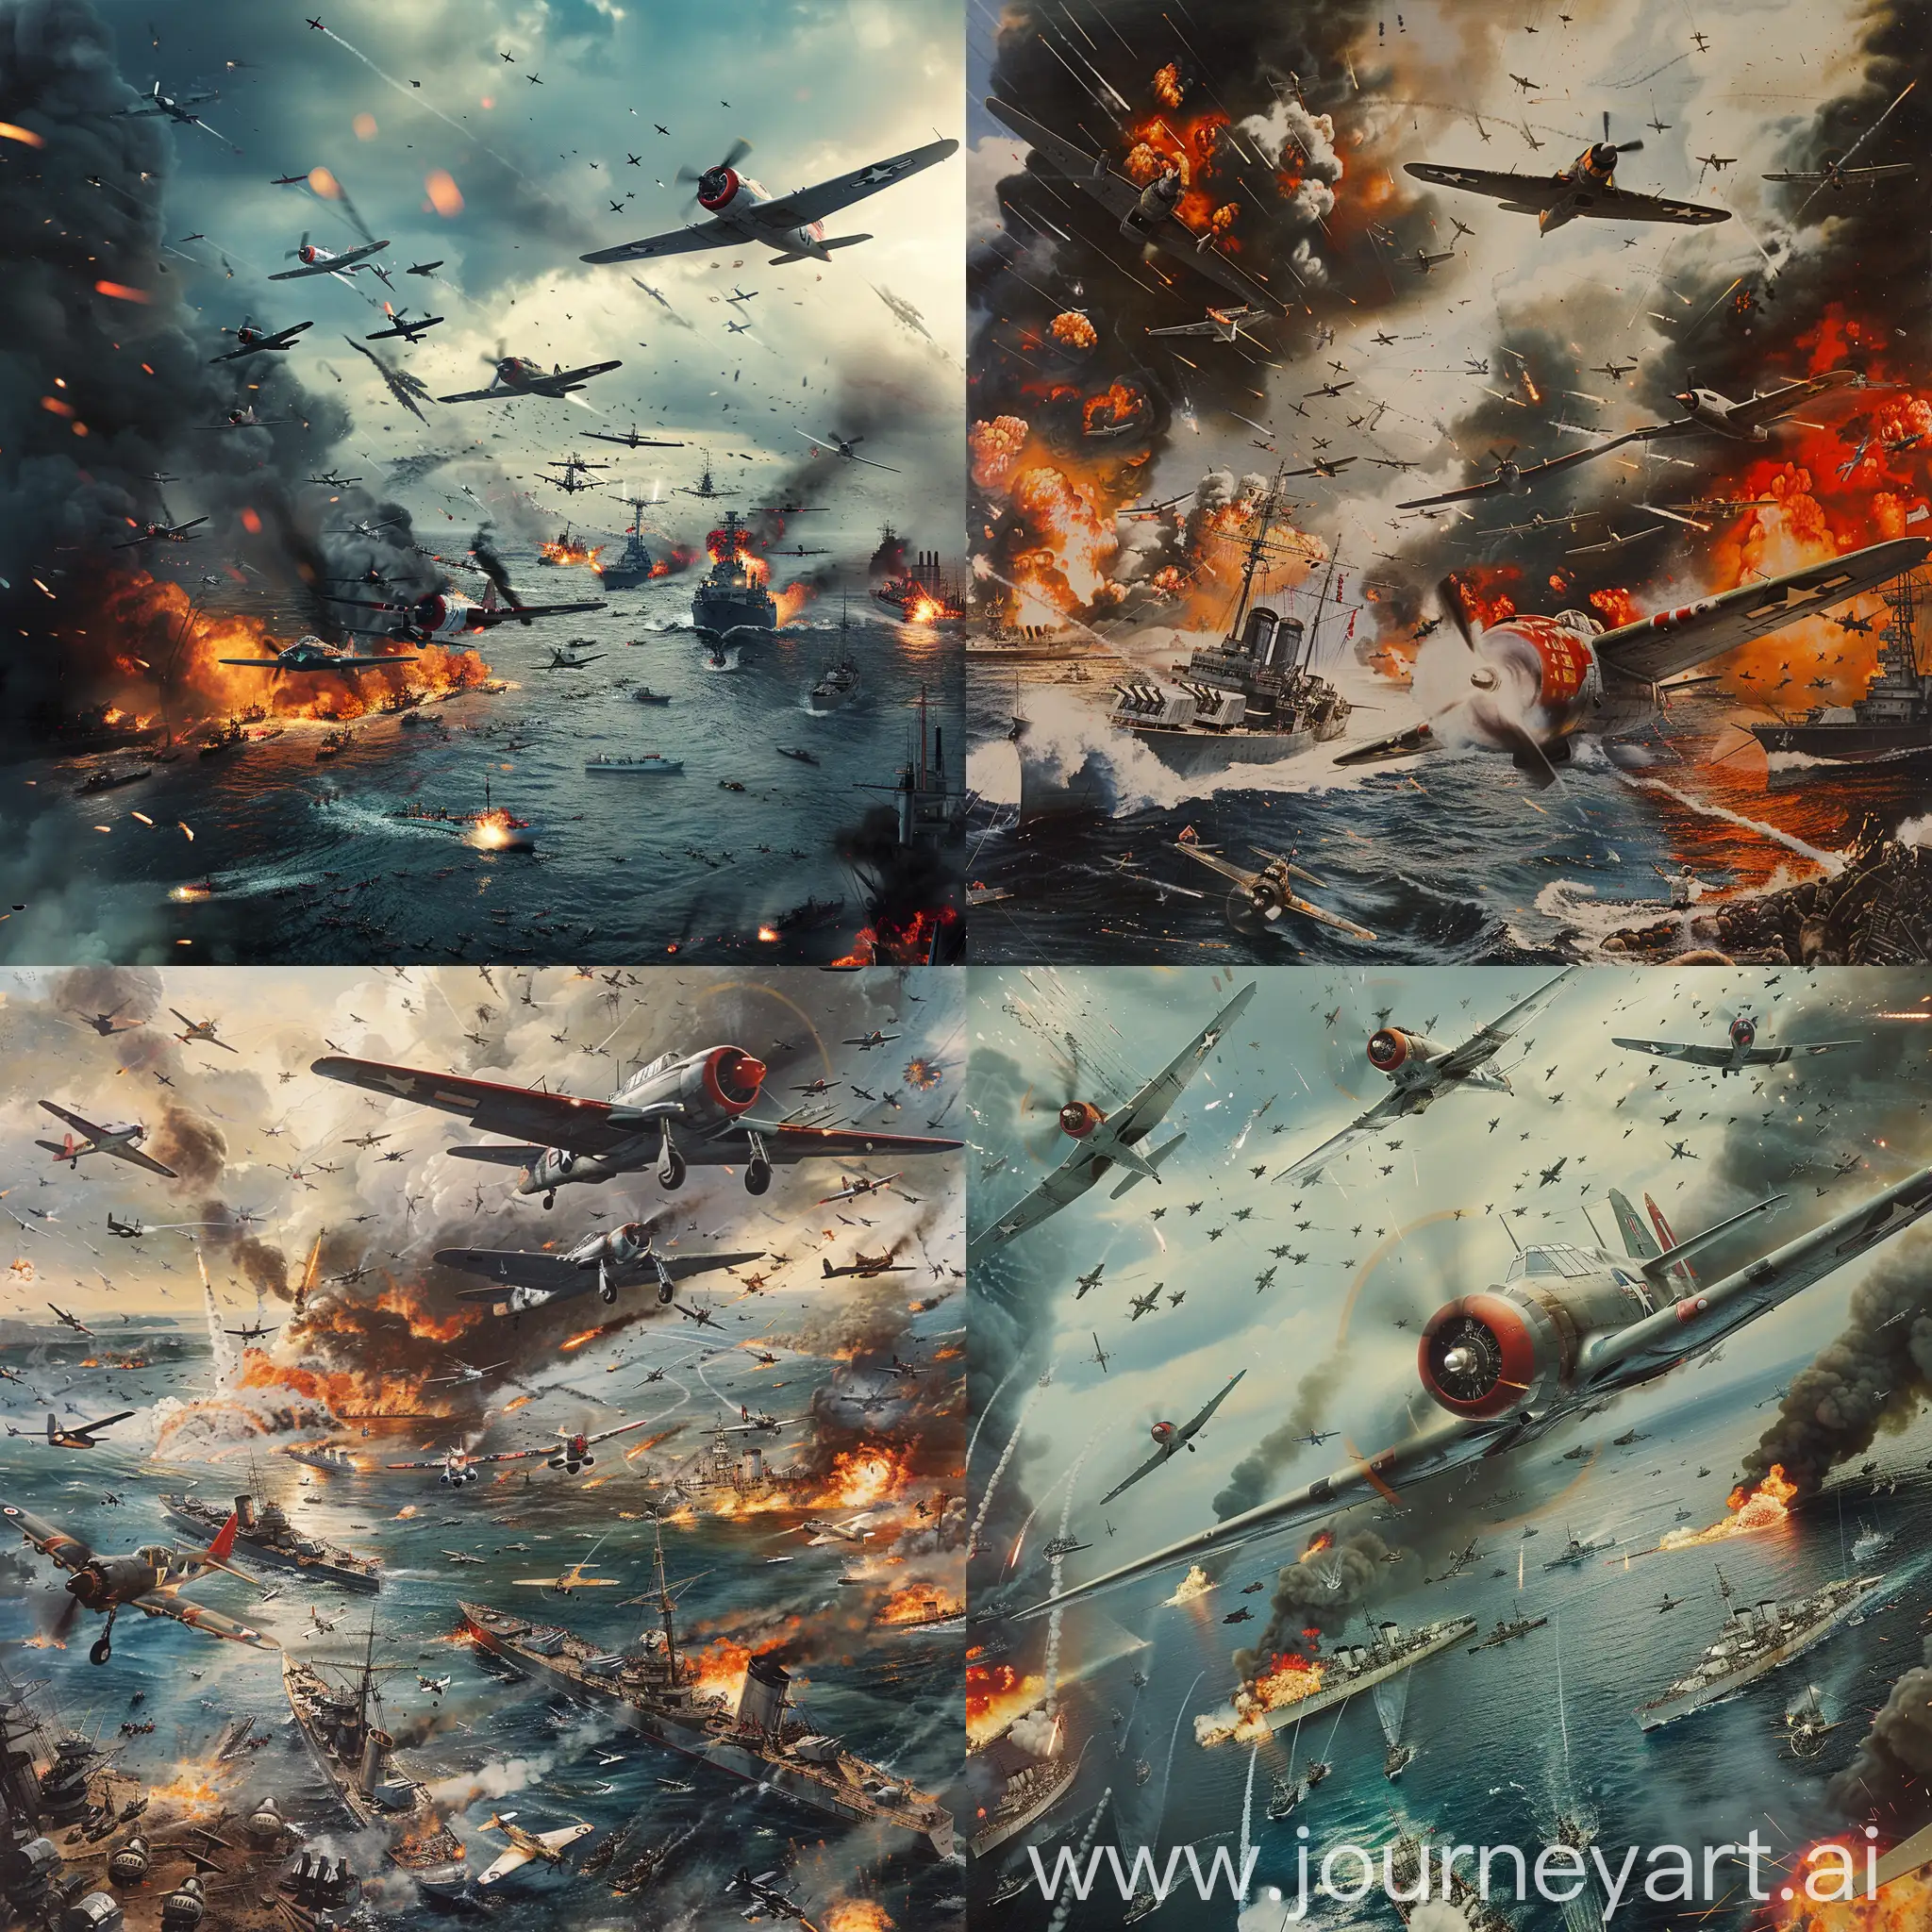 Intense-Aerial-Combat-at-Pearl-Harbor-Fighter-Planes-Clash-Amidst-Explosions-and-Chaos